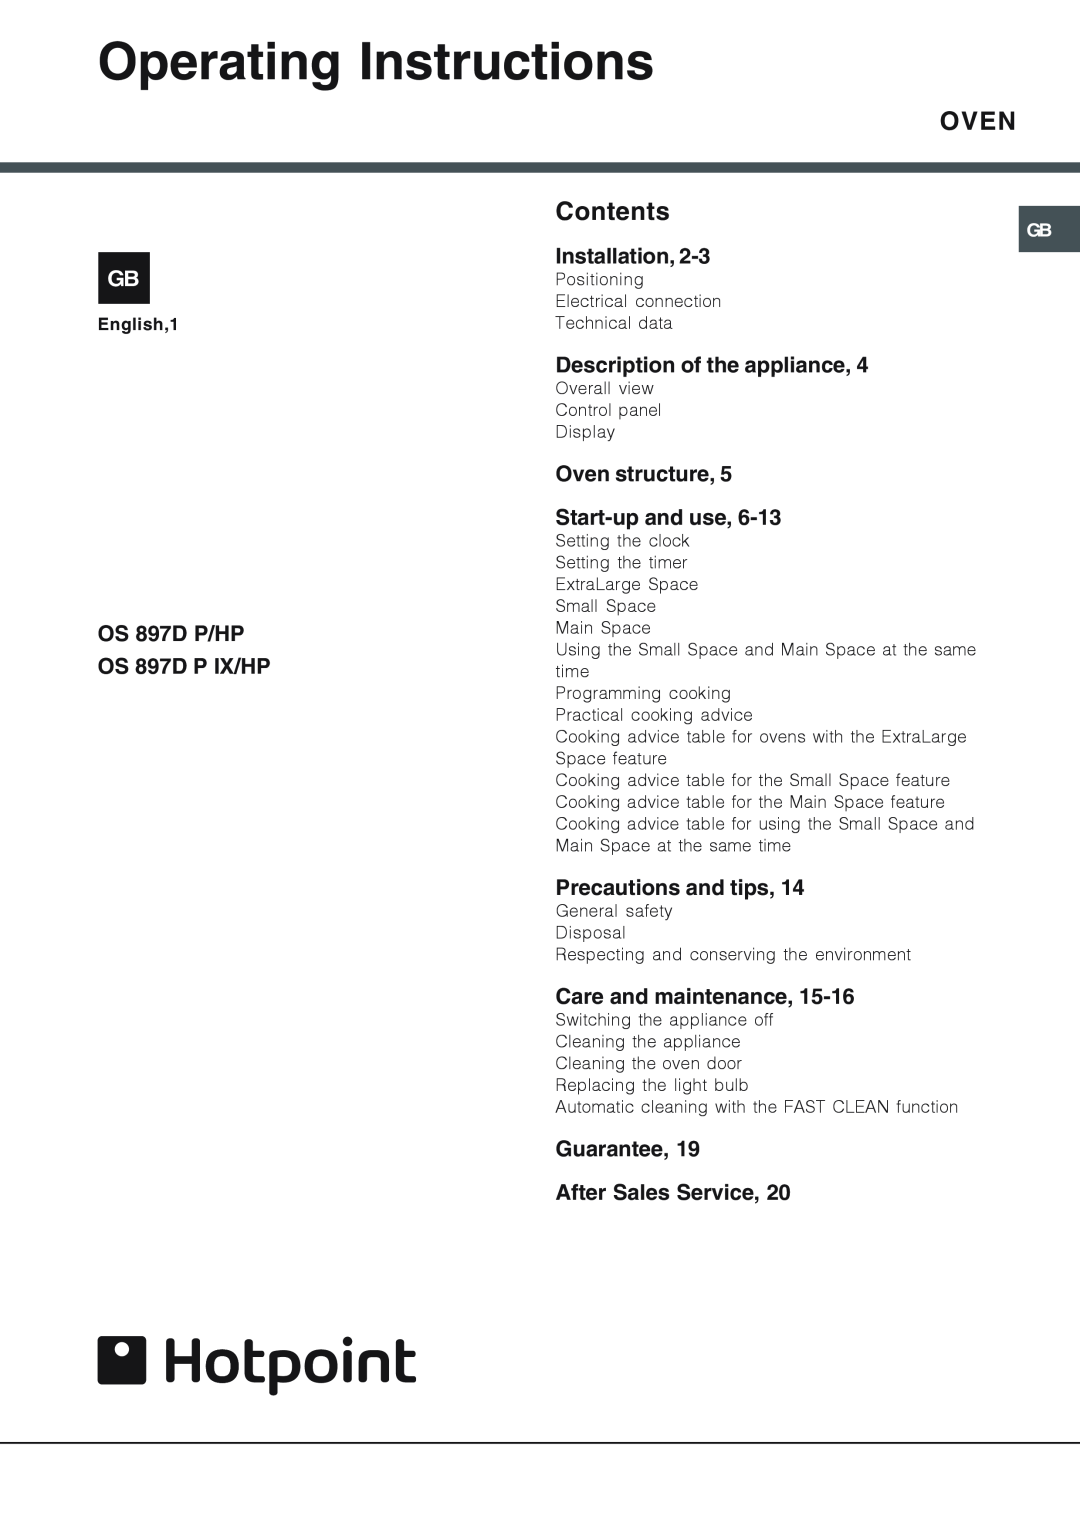 Hotpoint OS 897D P IX/HP manual Operating Instructions, Installation, Description of the appliance, Precautions and tips 